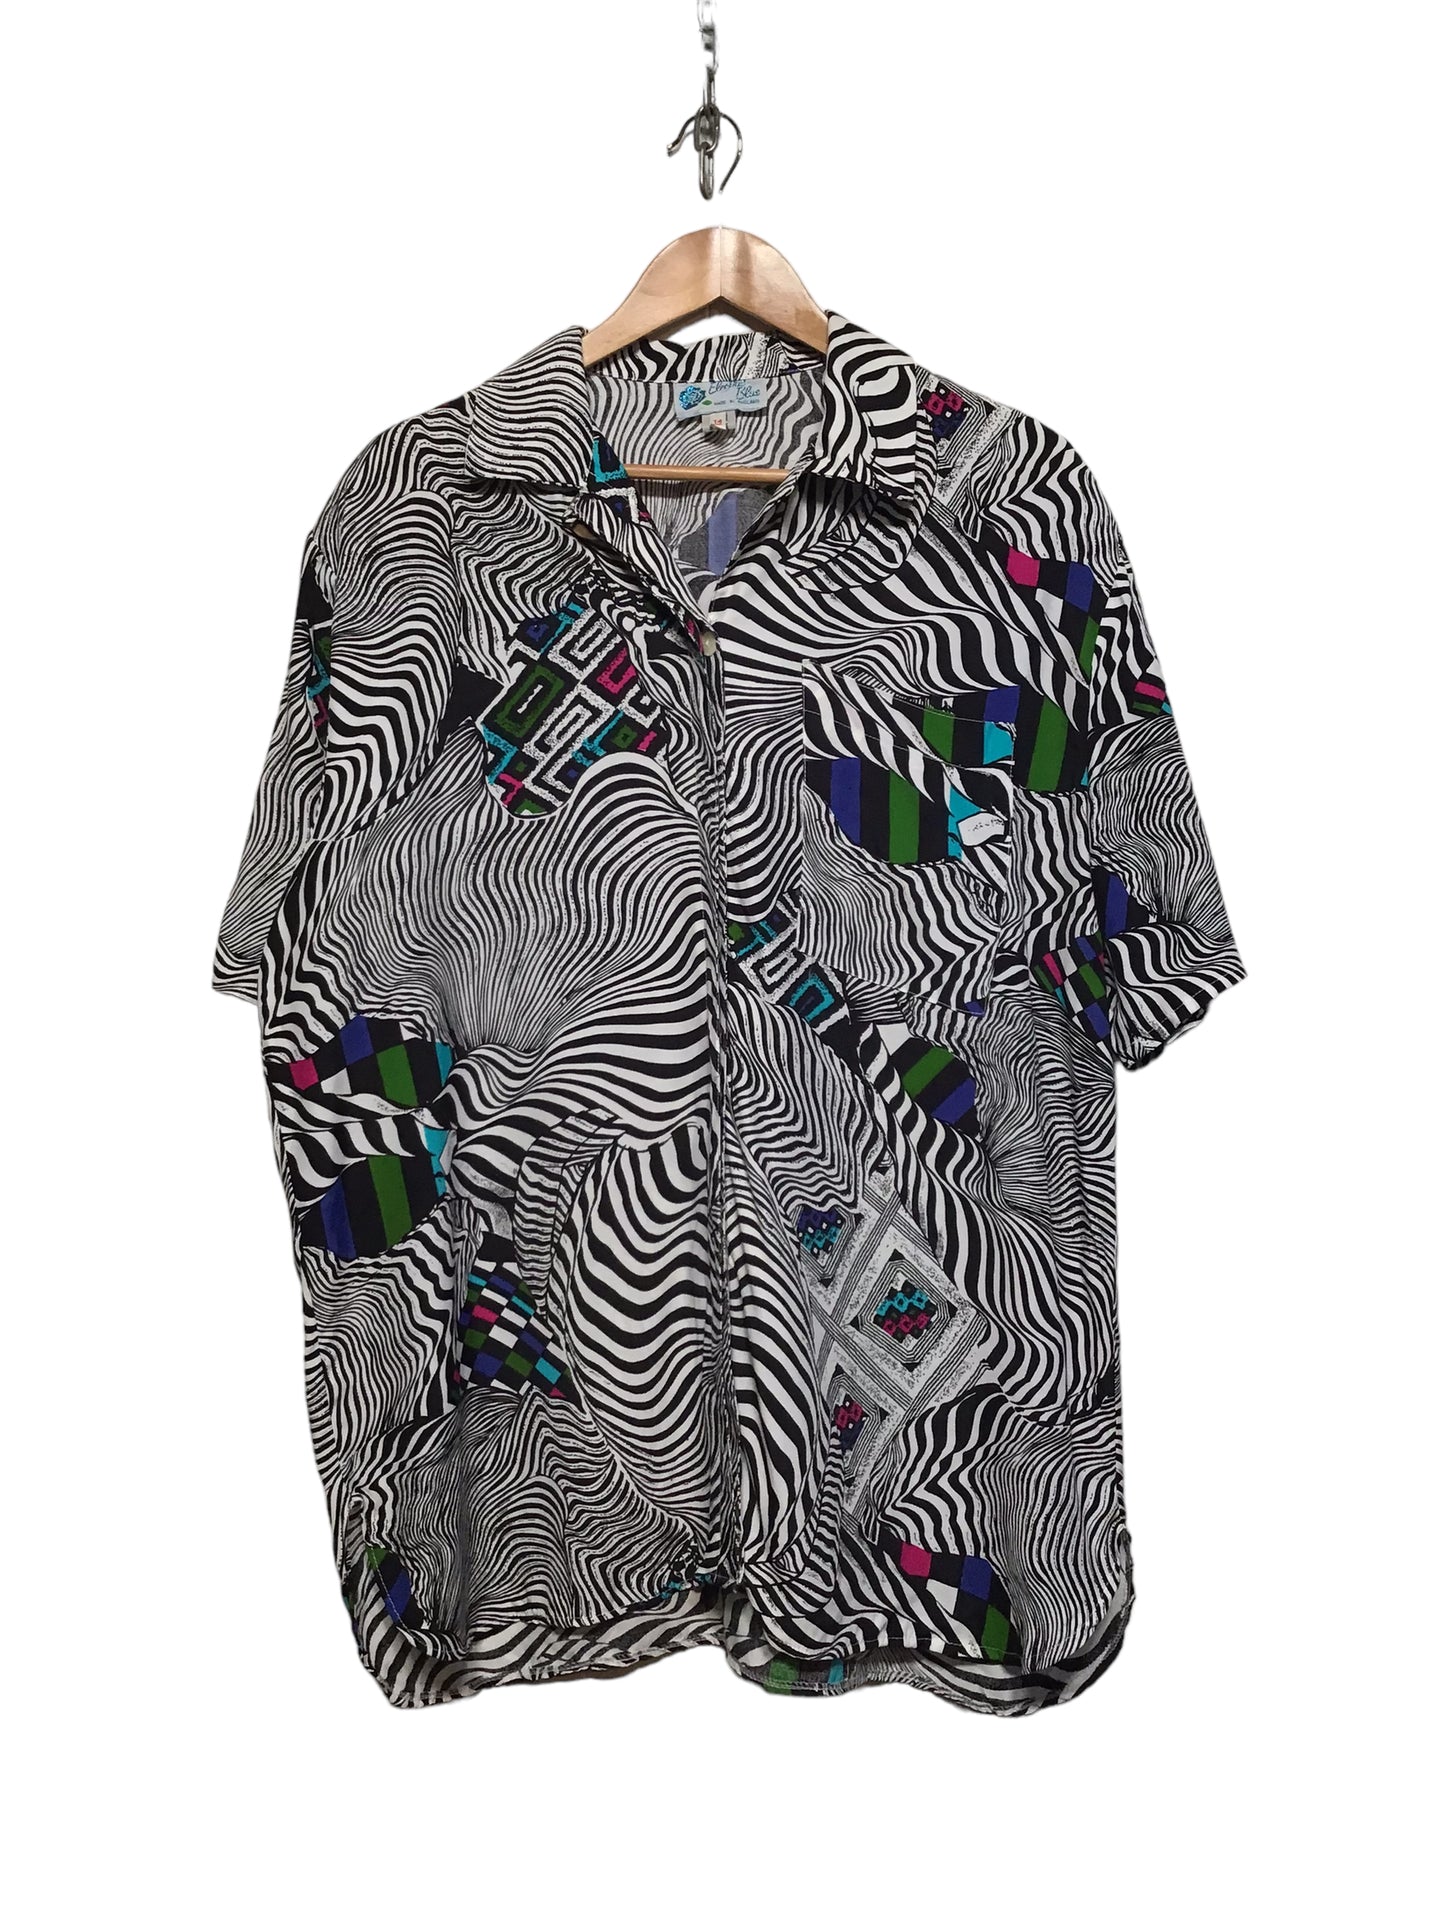 Black and White Printed Shirt (Size L)